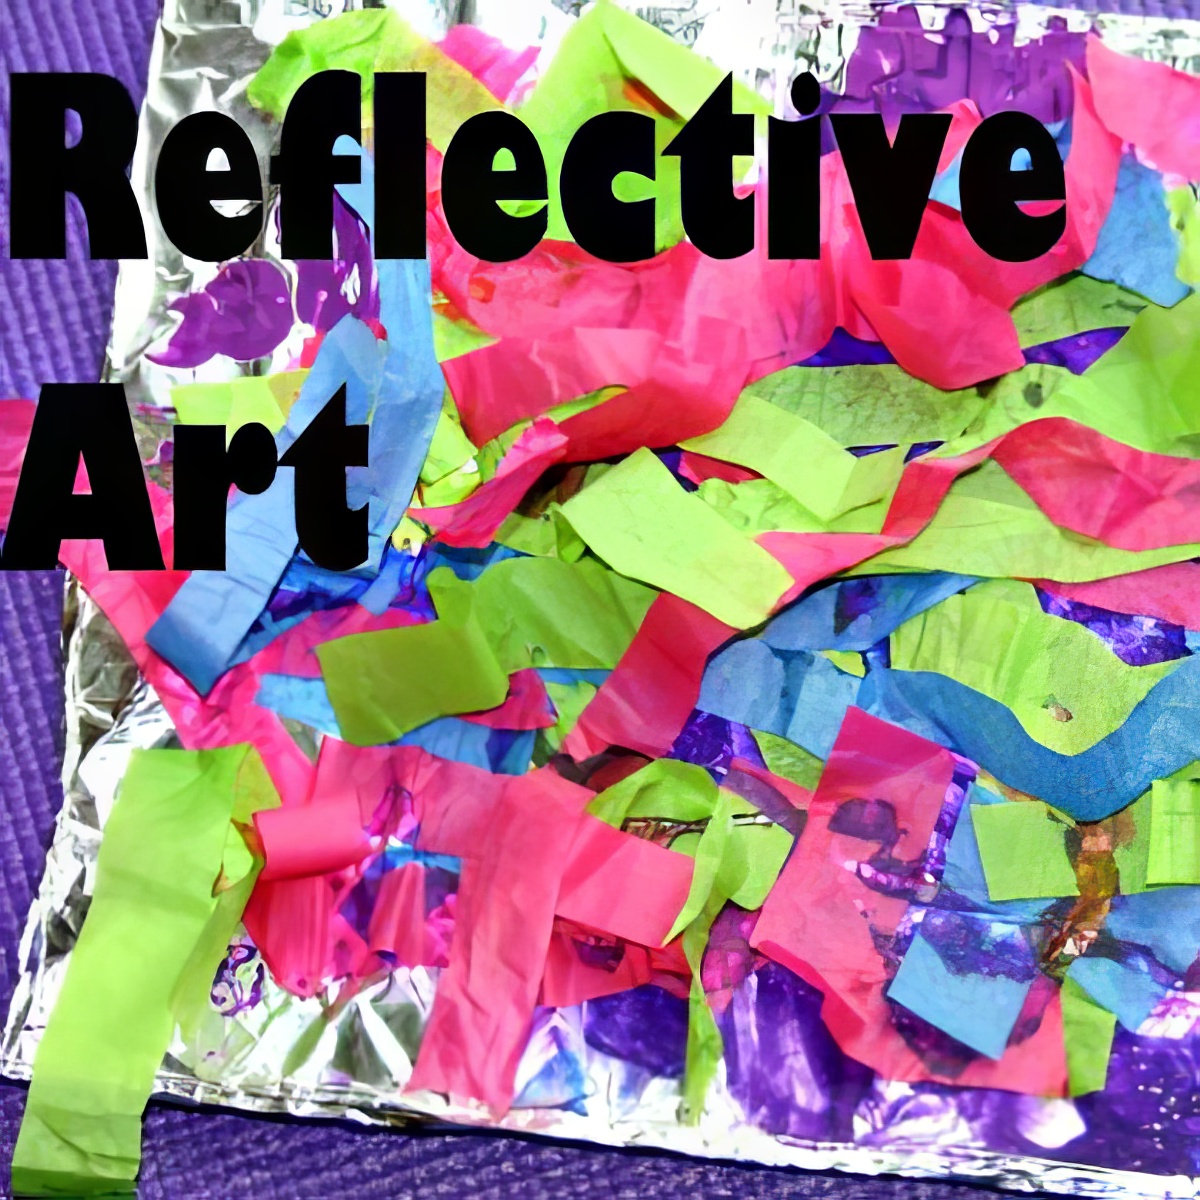 Tin-Foil-Art-with-words, fun art activities for 2-year-olds, toddler fun arts and crafts